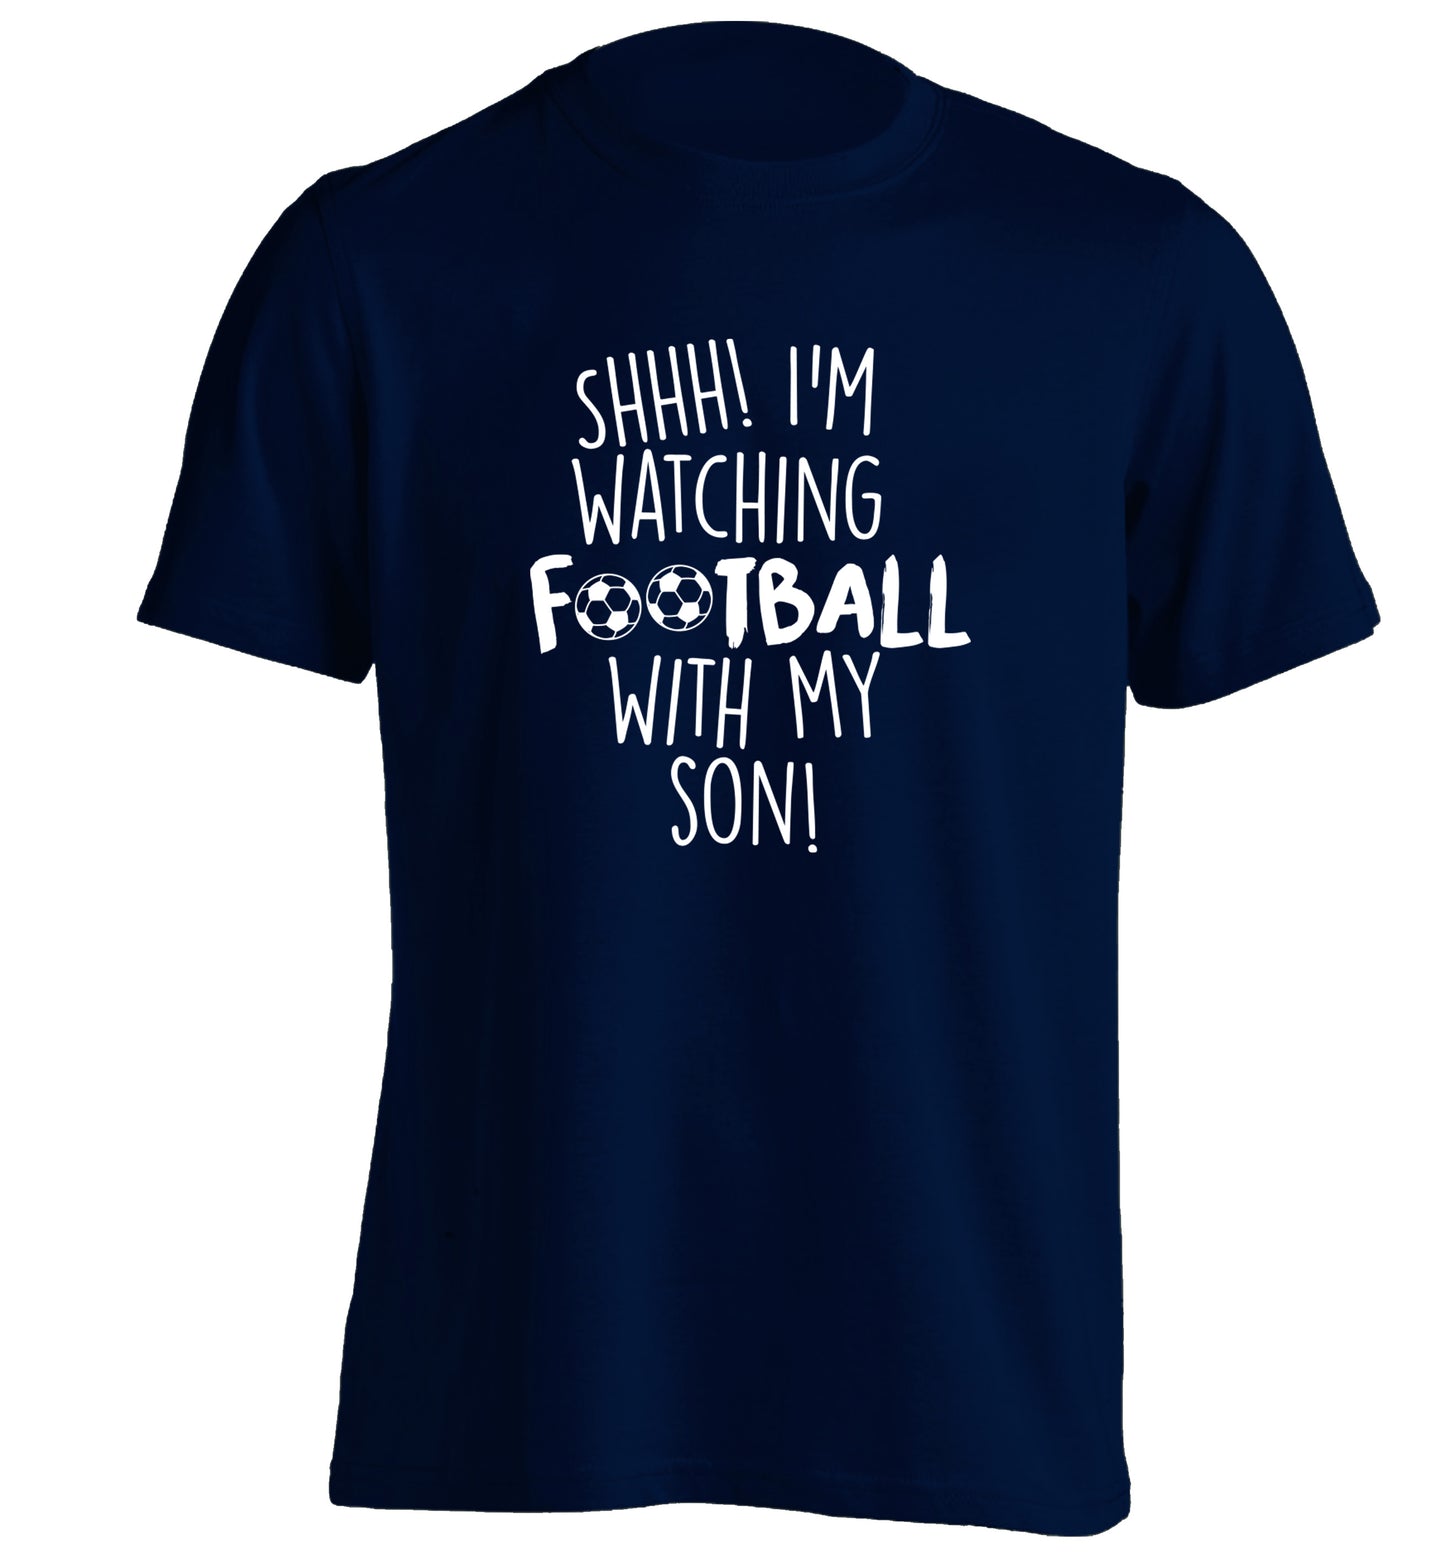 Shhh I'm watching football with my son adults unisexnavy Tshirt 2XL